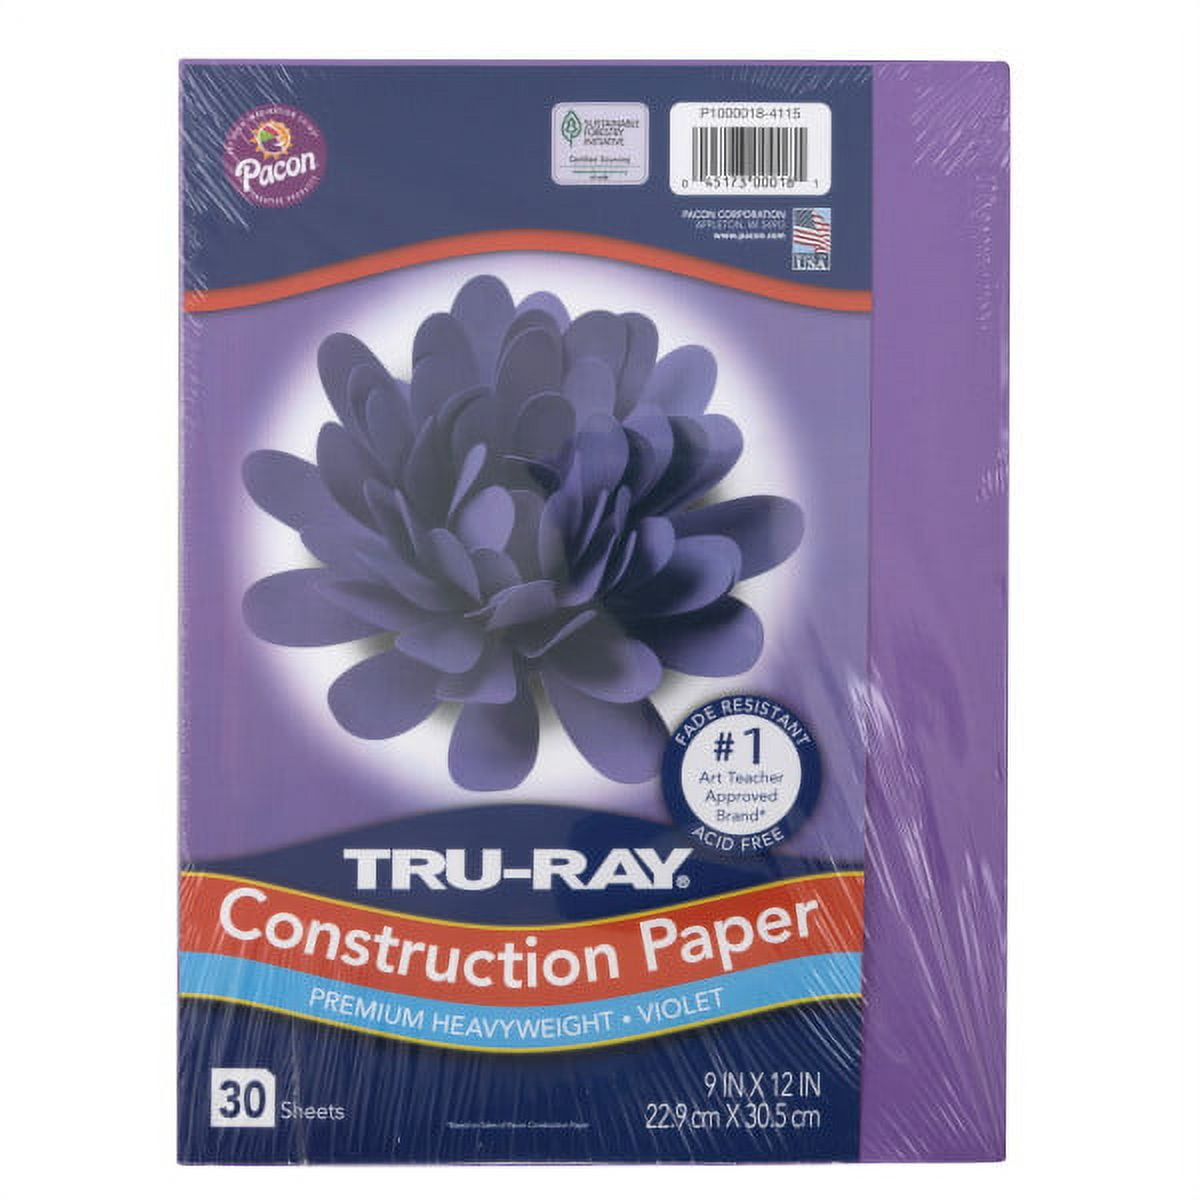 Tru-Ray 9 in x 12 in Construction Paper, White, 30 Sheets 